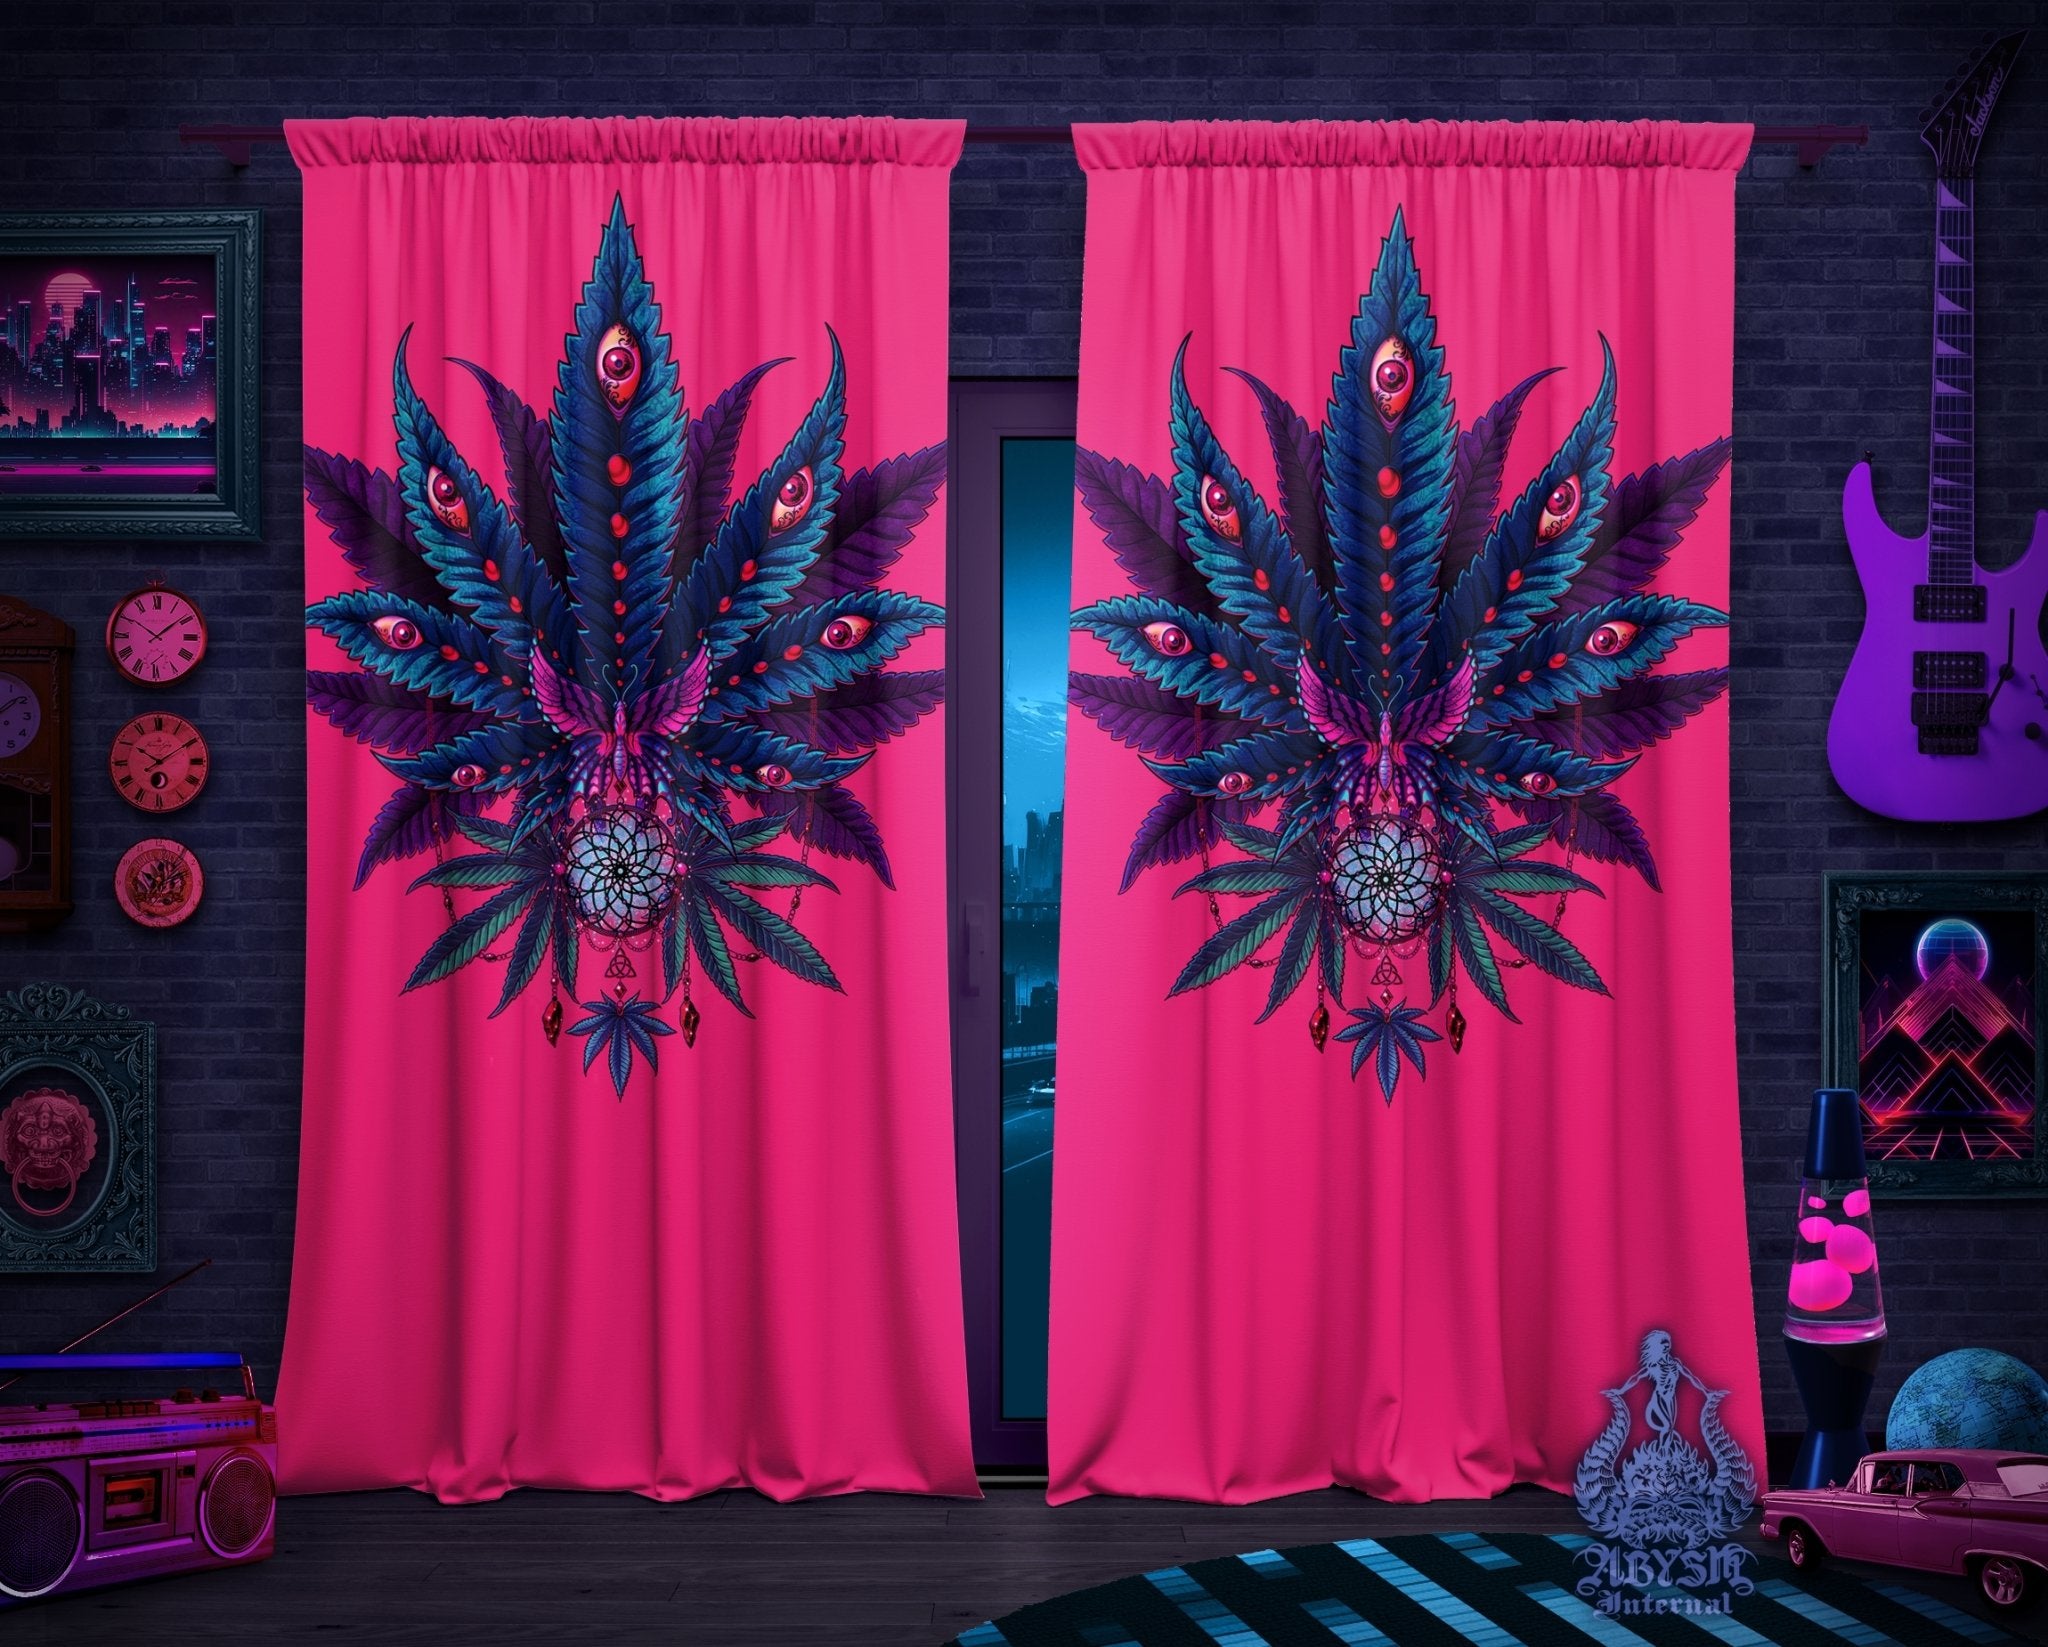 Weed Blackout Curtains, Cannabis Home and Shop Decor, Long Window Panels, Psychedelic Print, 420 Room 80s Art - Neon I - Abysm Internal